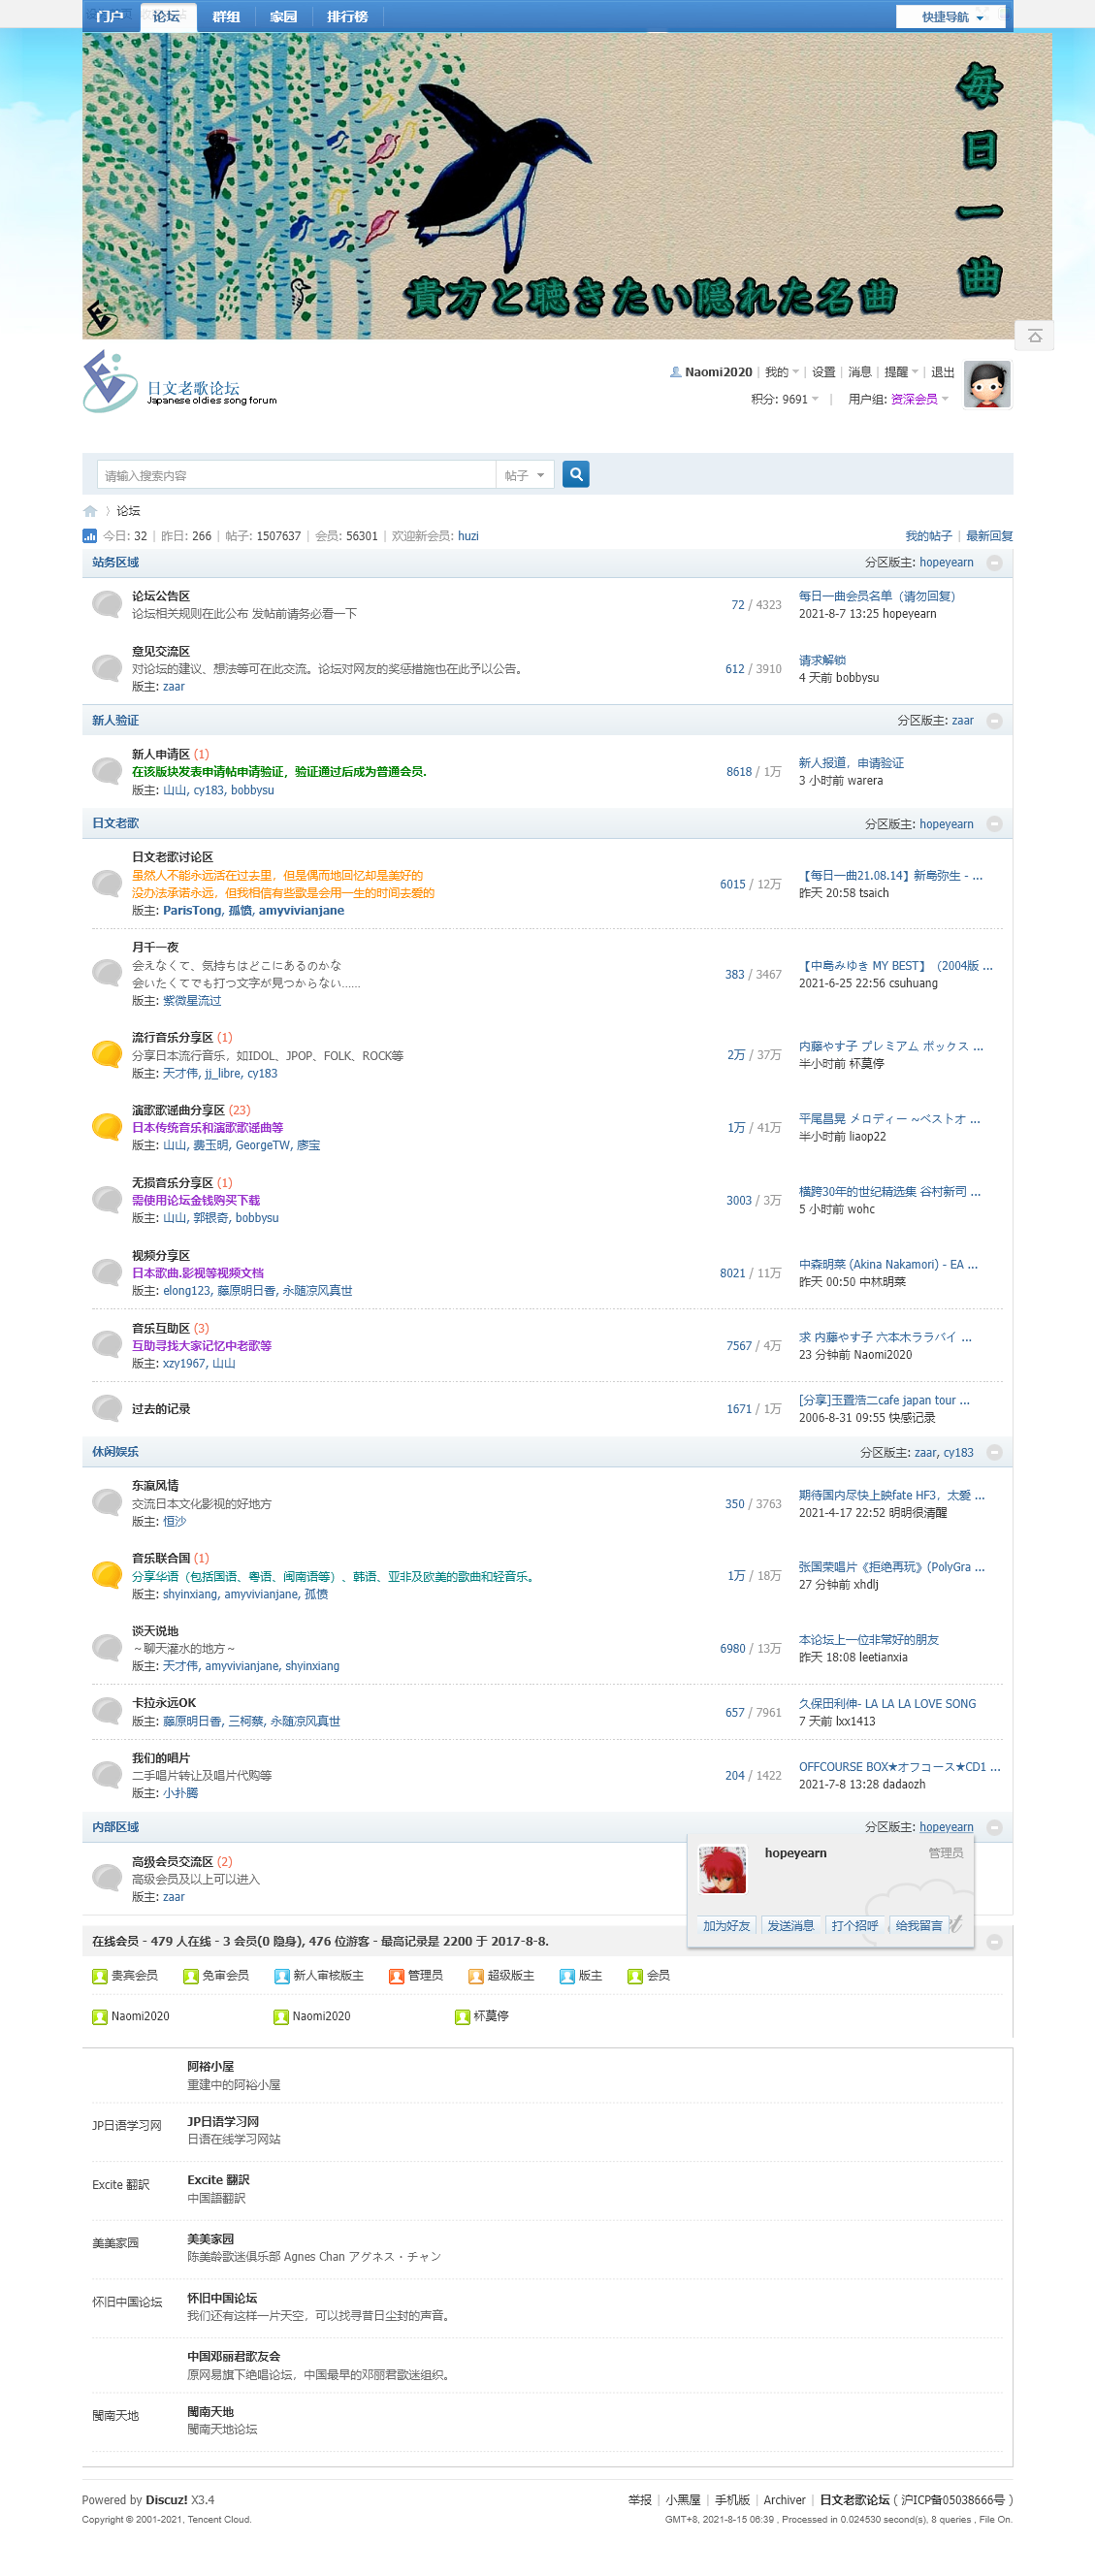 Screenshot 2021-08-15 at 07-41-06 日文老歌论坛 - Powered by Discuz .png